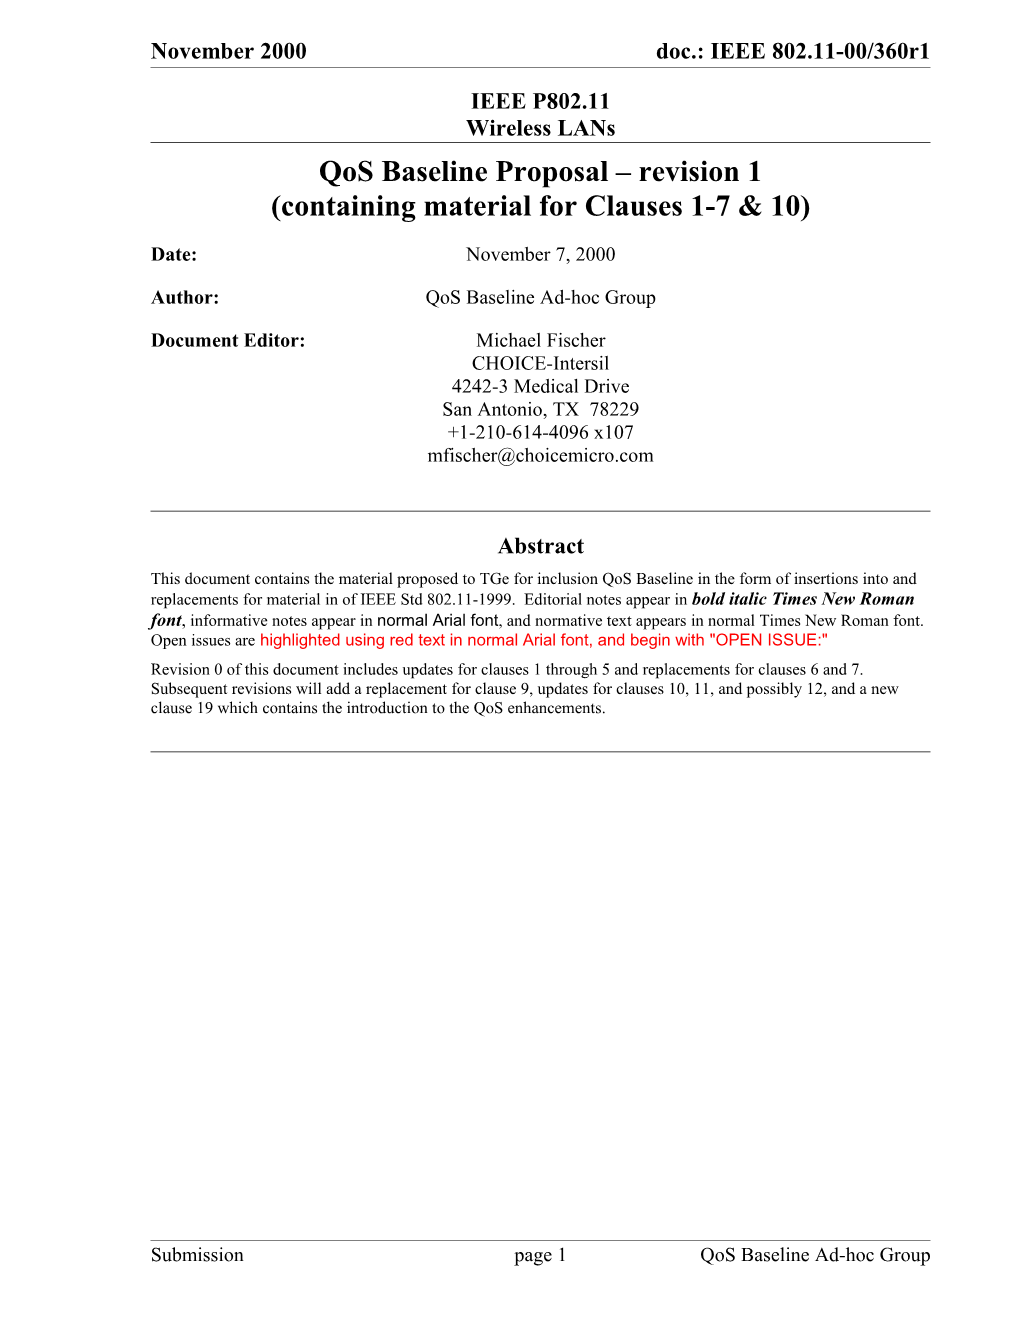 Qos Baseline Proposal Revision 1 (Containing Material for Clauses 1-7 & 10)